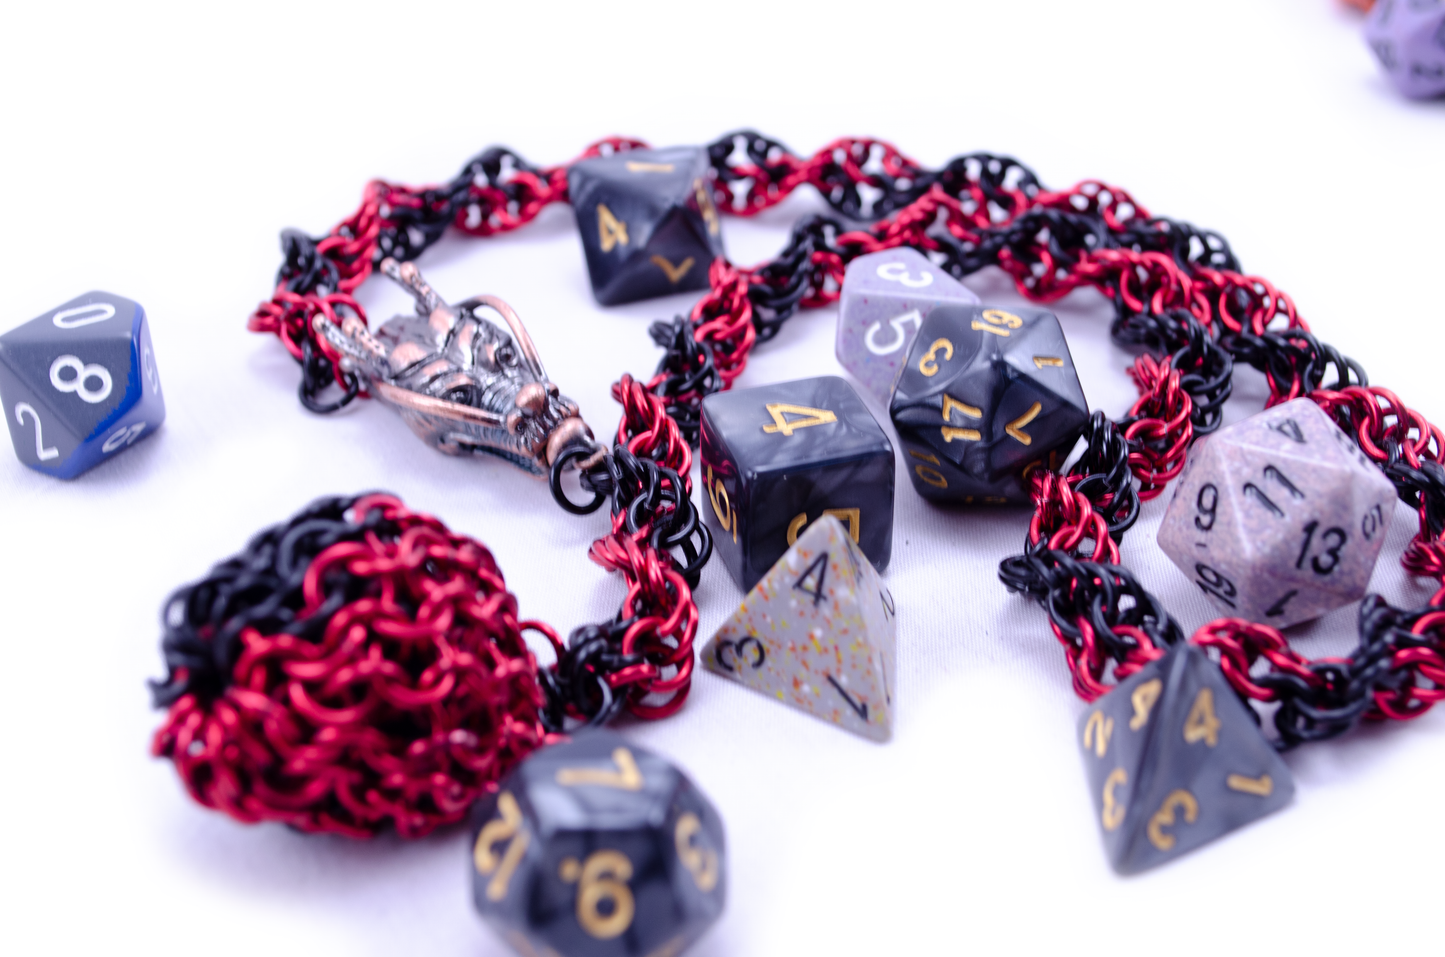 D20 captured necklace with dragon head clasp